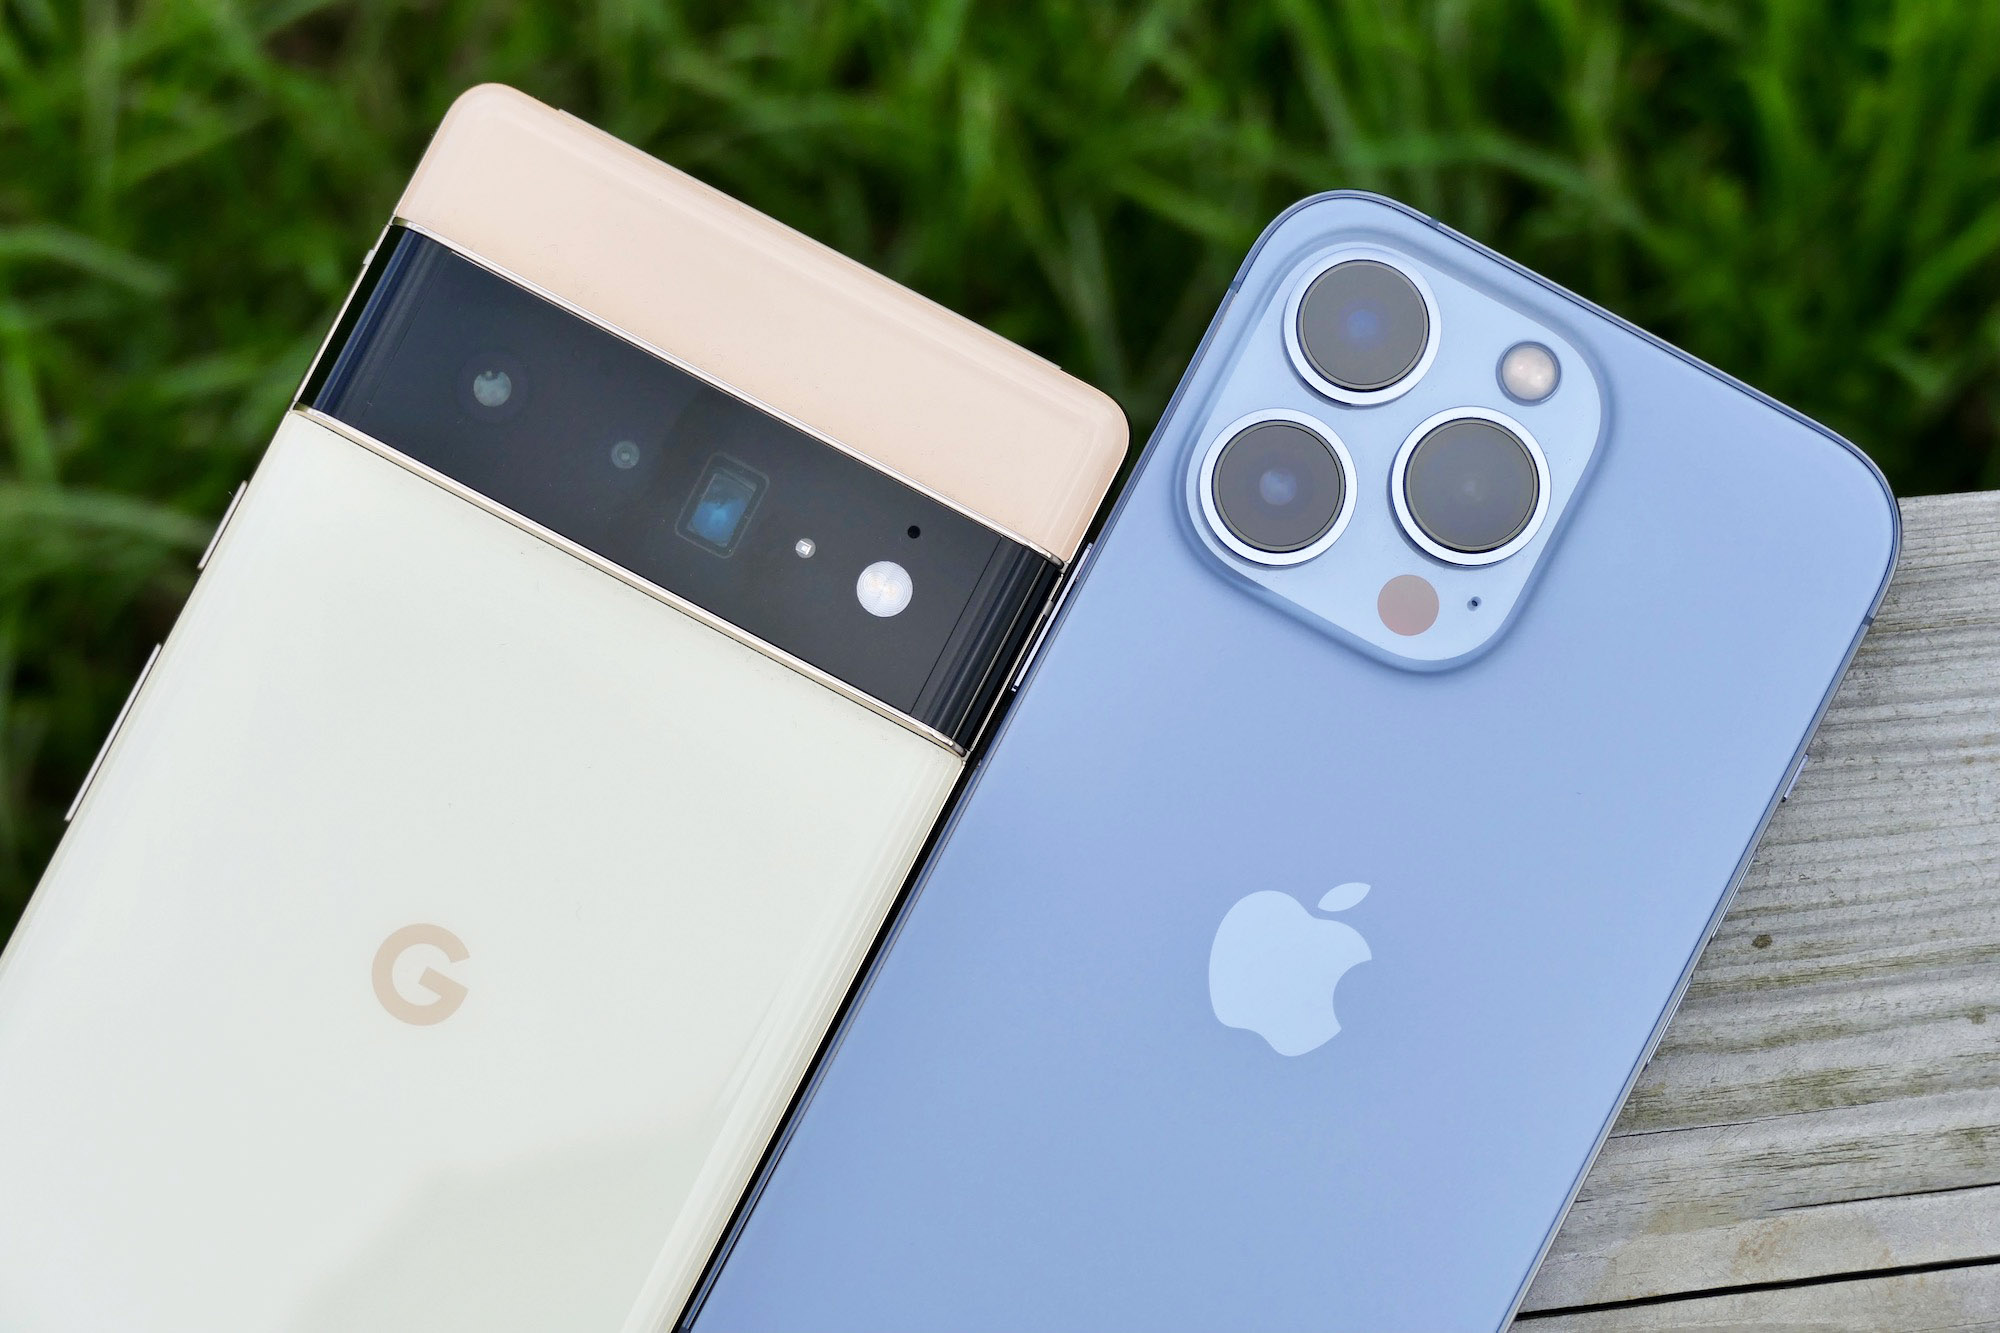 Google Pixel 6 Pro review: Bringing the fight to the iPhone 13 Pro